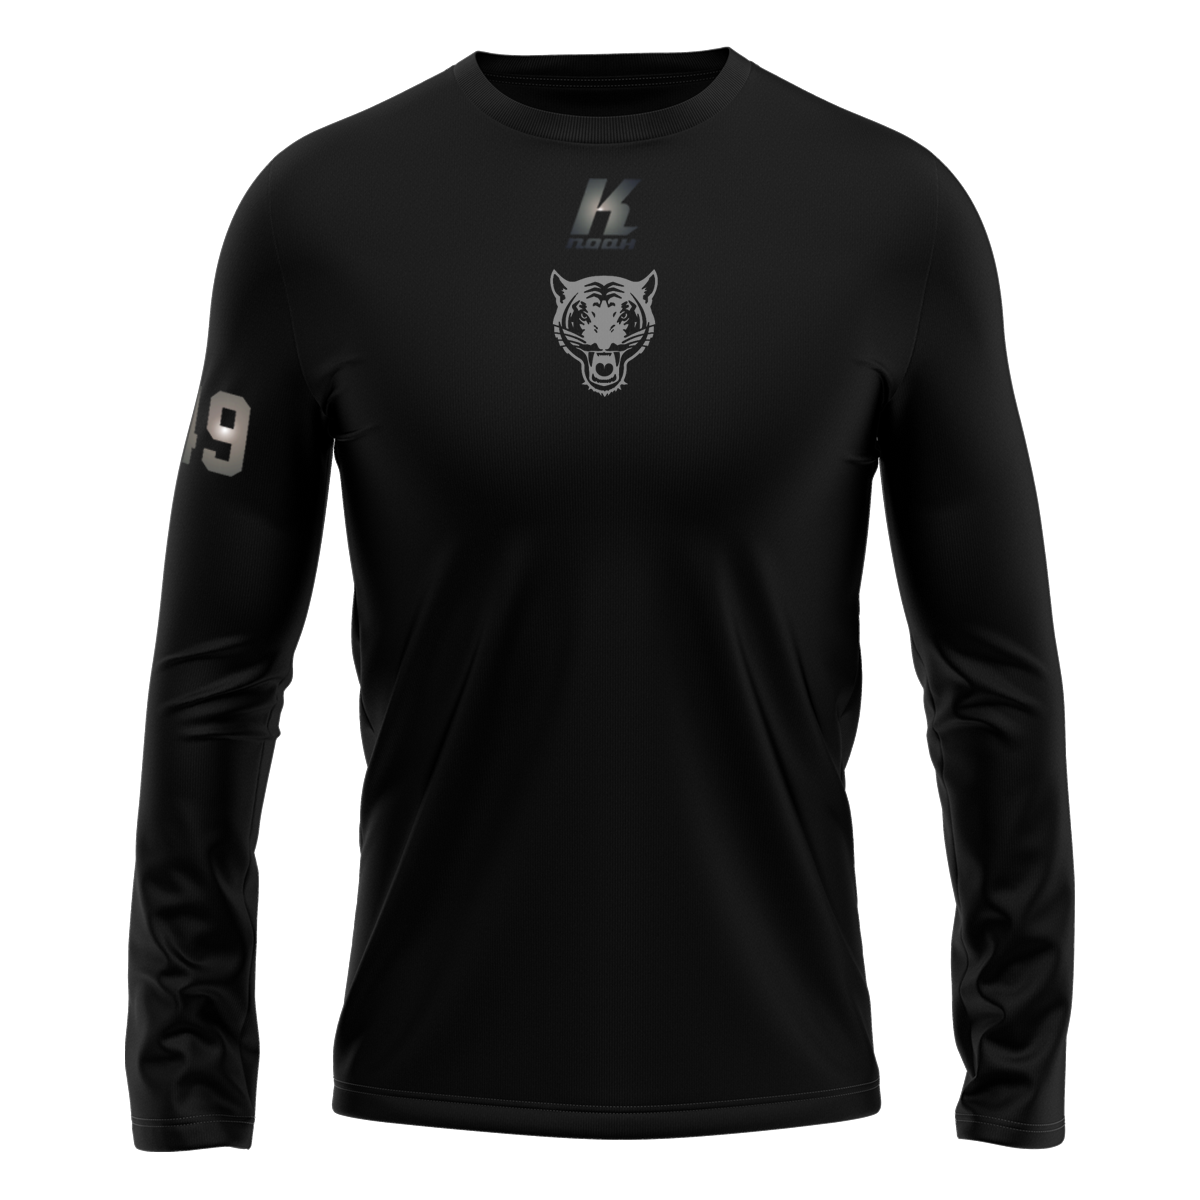 Tigers "Blackline" K.Tech Longsleeve Tee L02071 with Playernumber/Initials